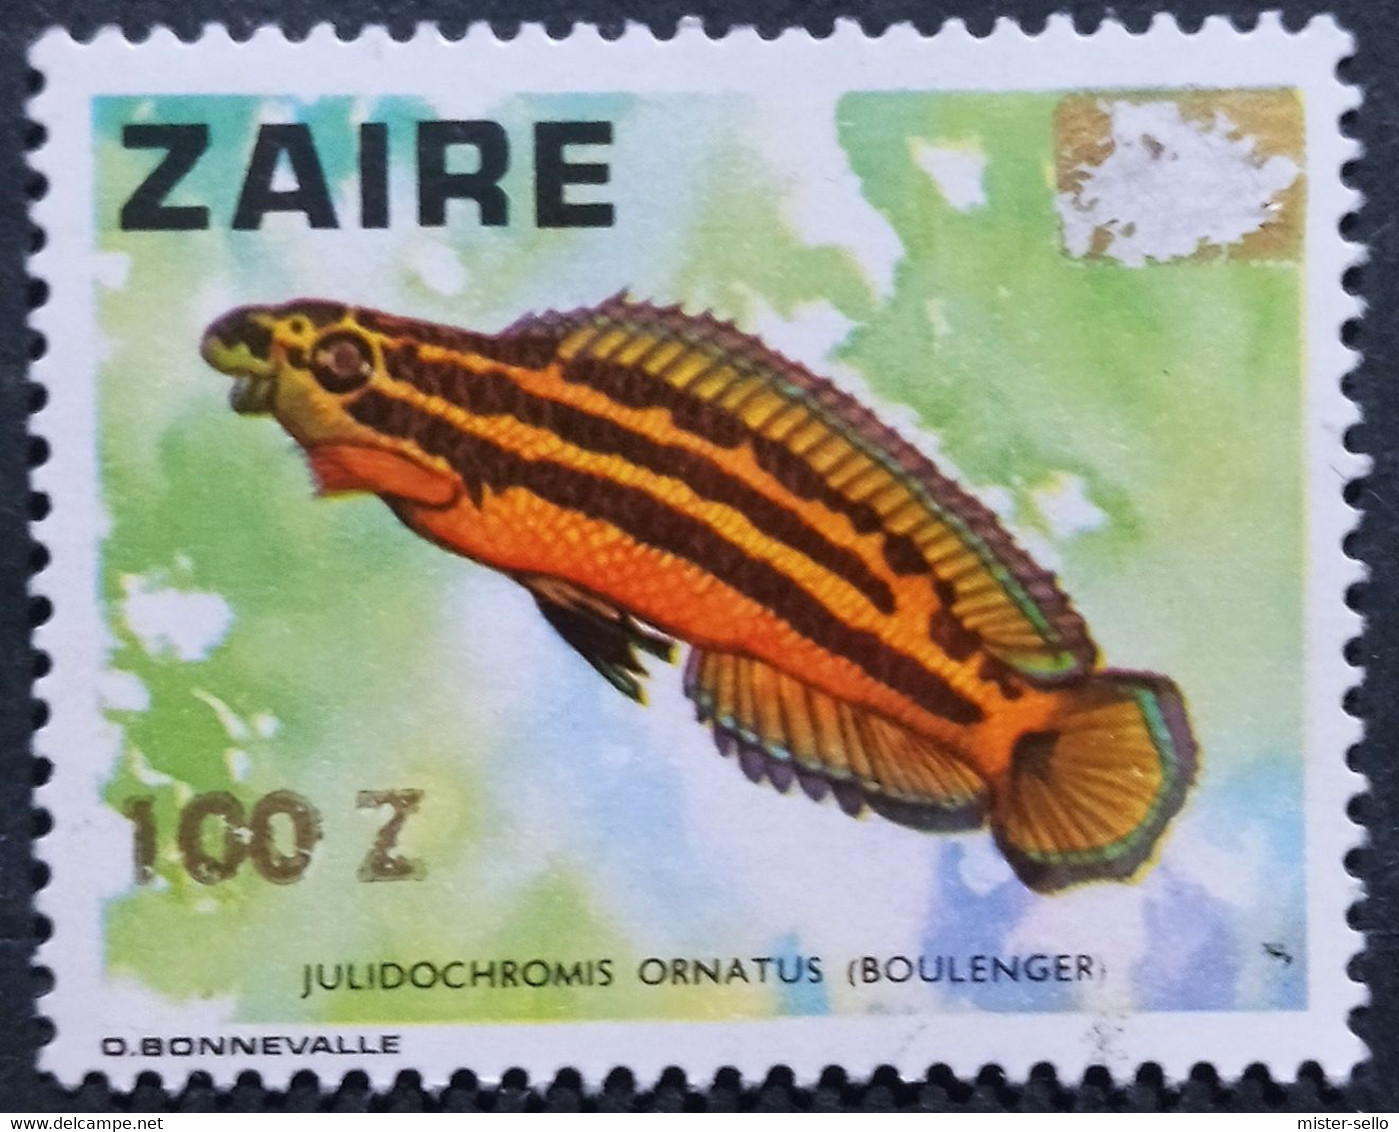 ZAIRE 1990 Stamp Surcharged. USADO - USED. - Gebraucht